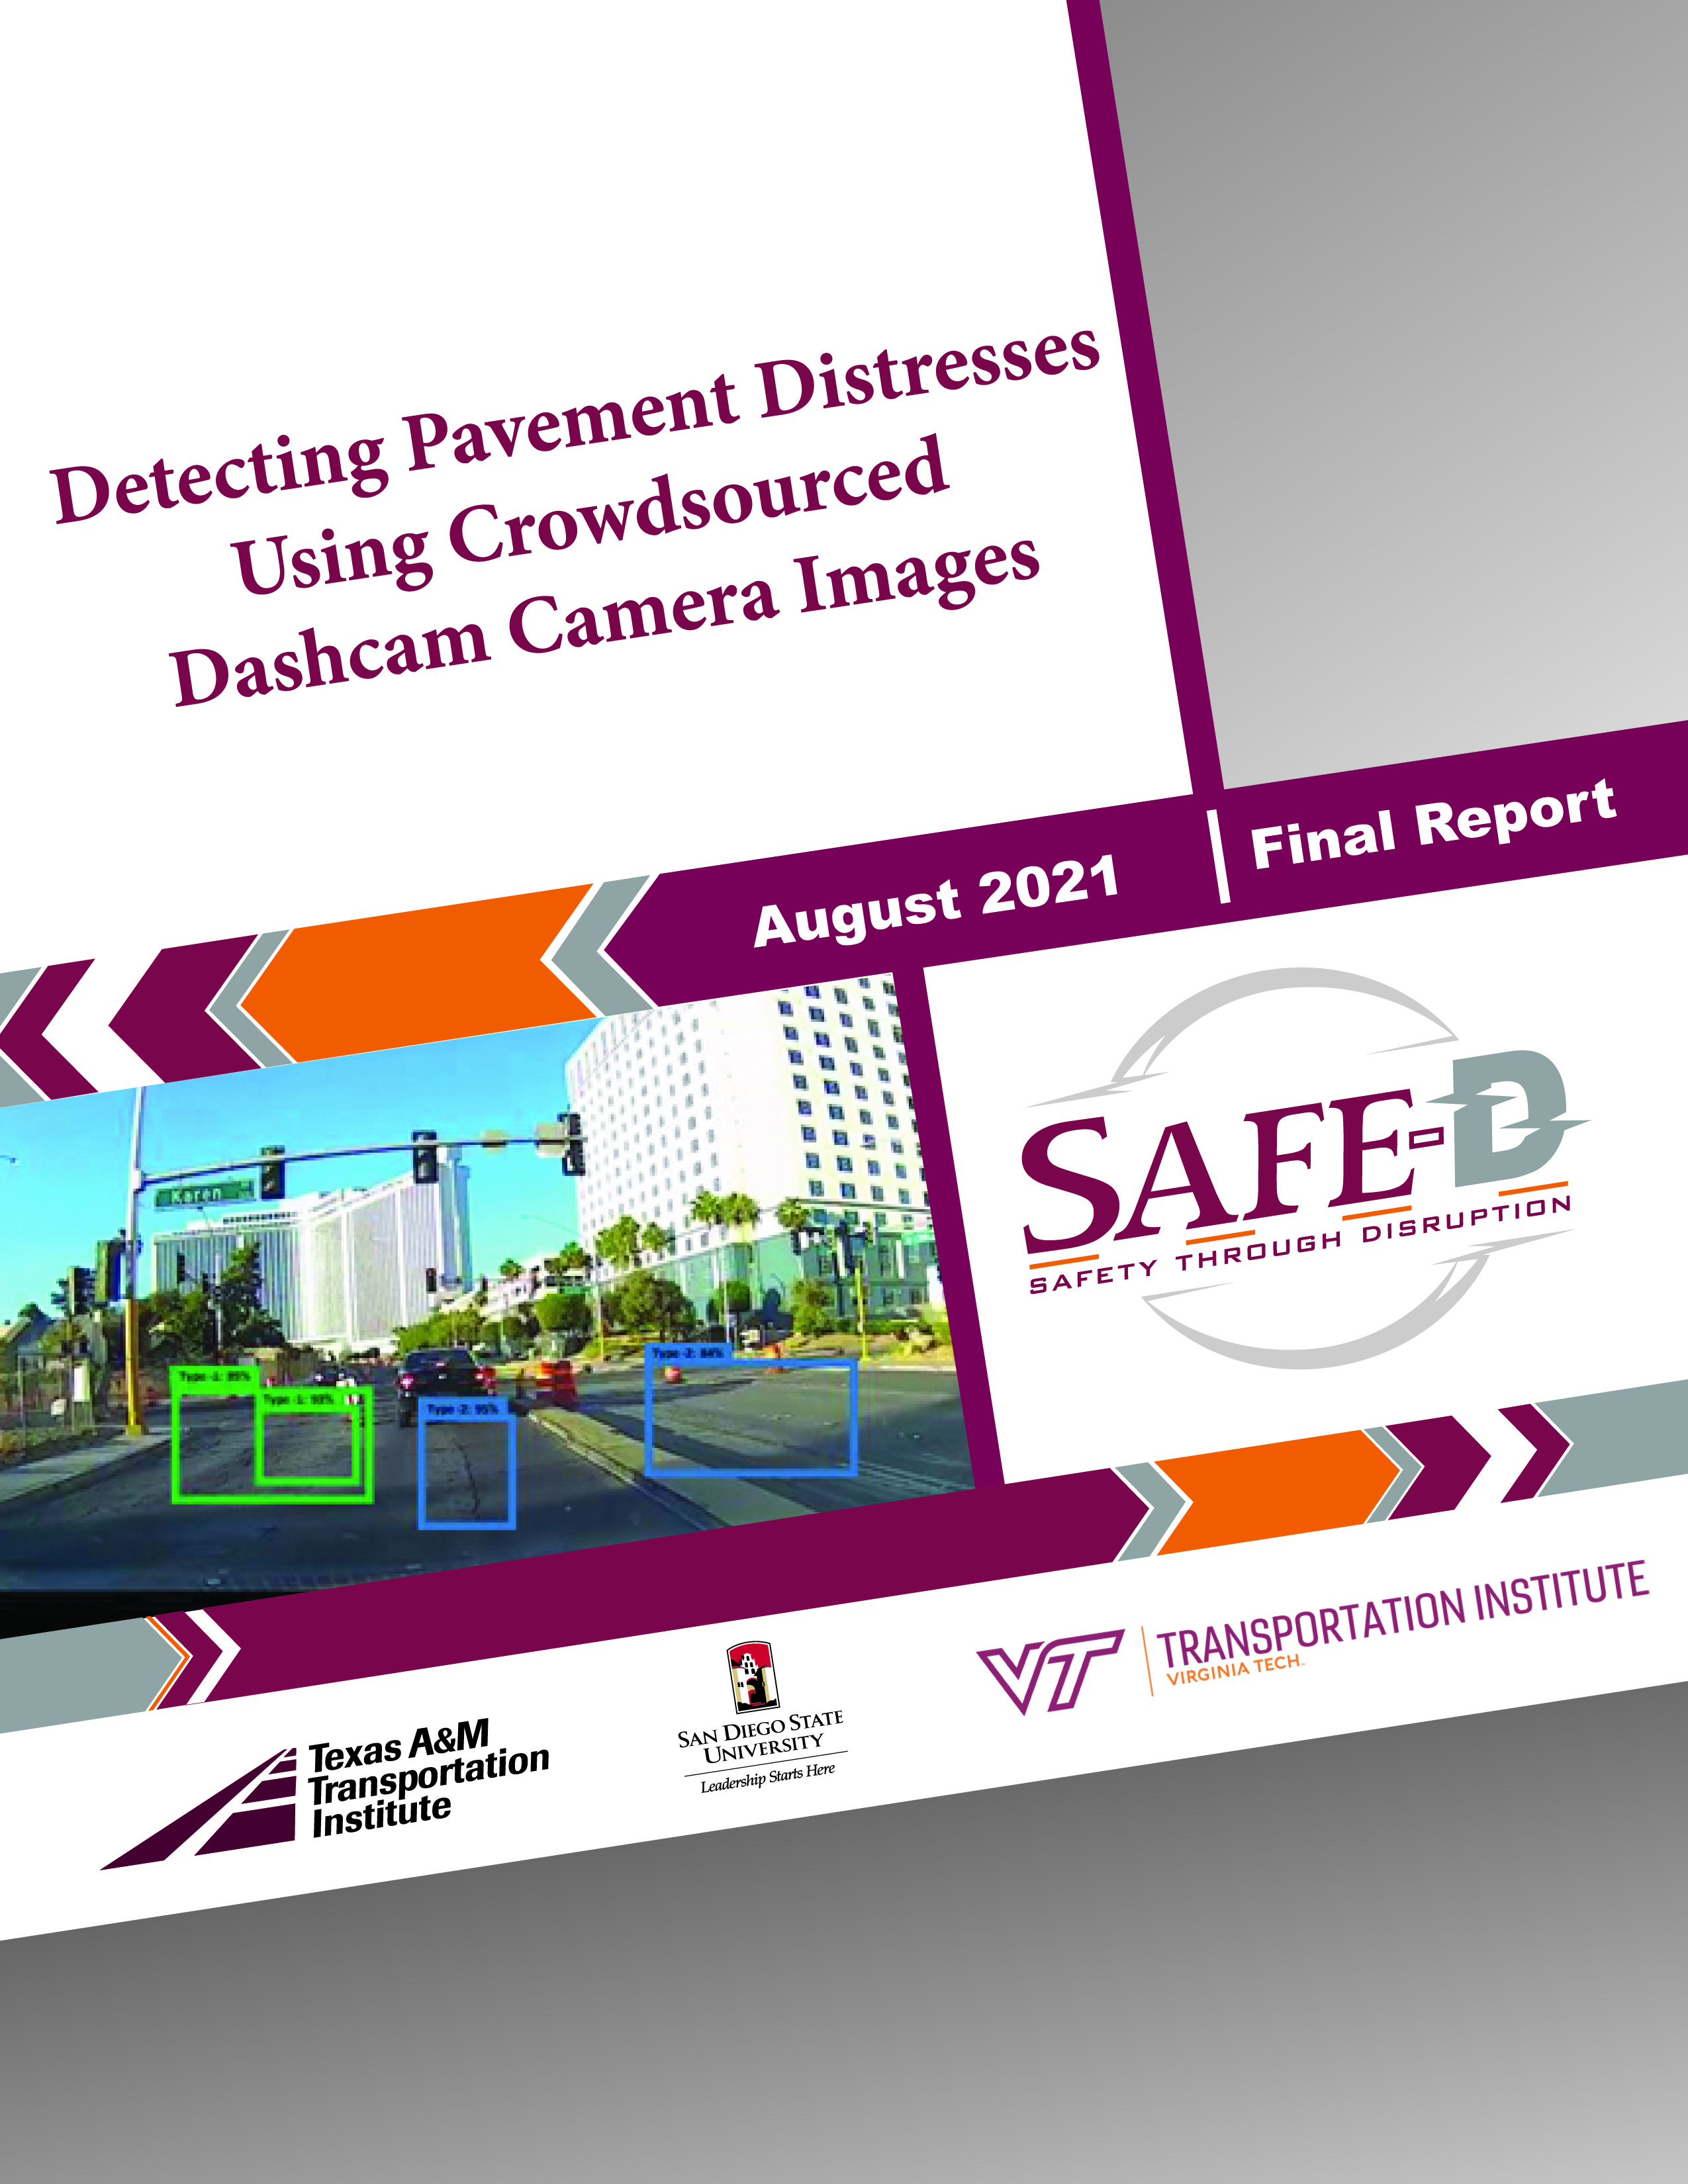 TTI-Student-07 Detecting Pavement Distresses Using Crowdsourced Dashcam Camera Images